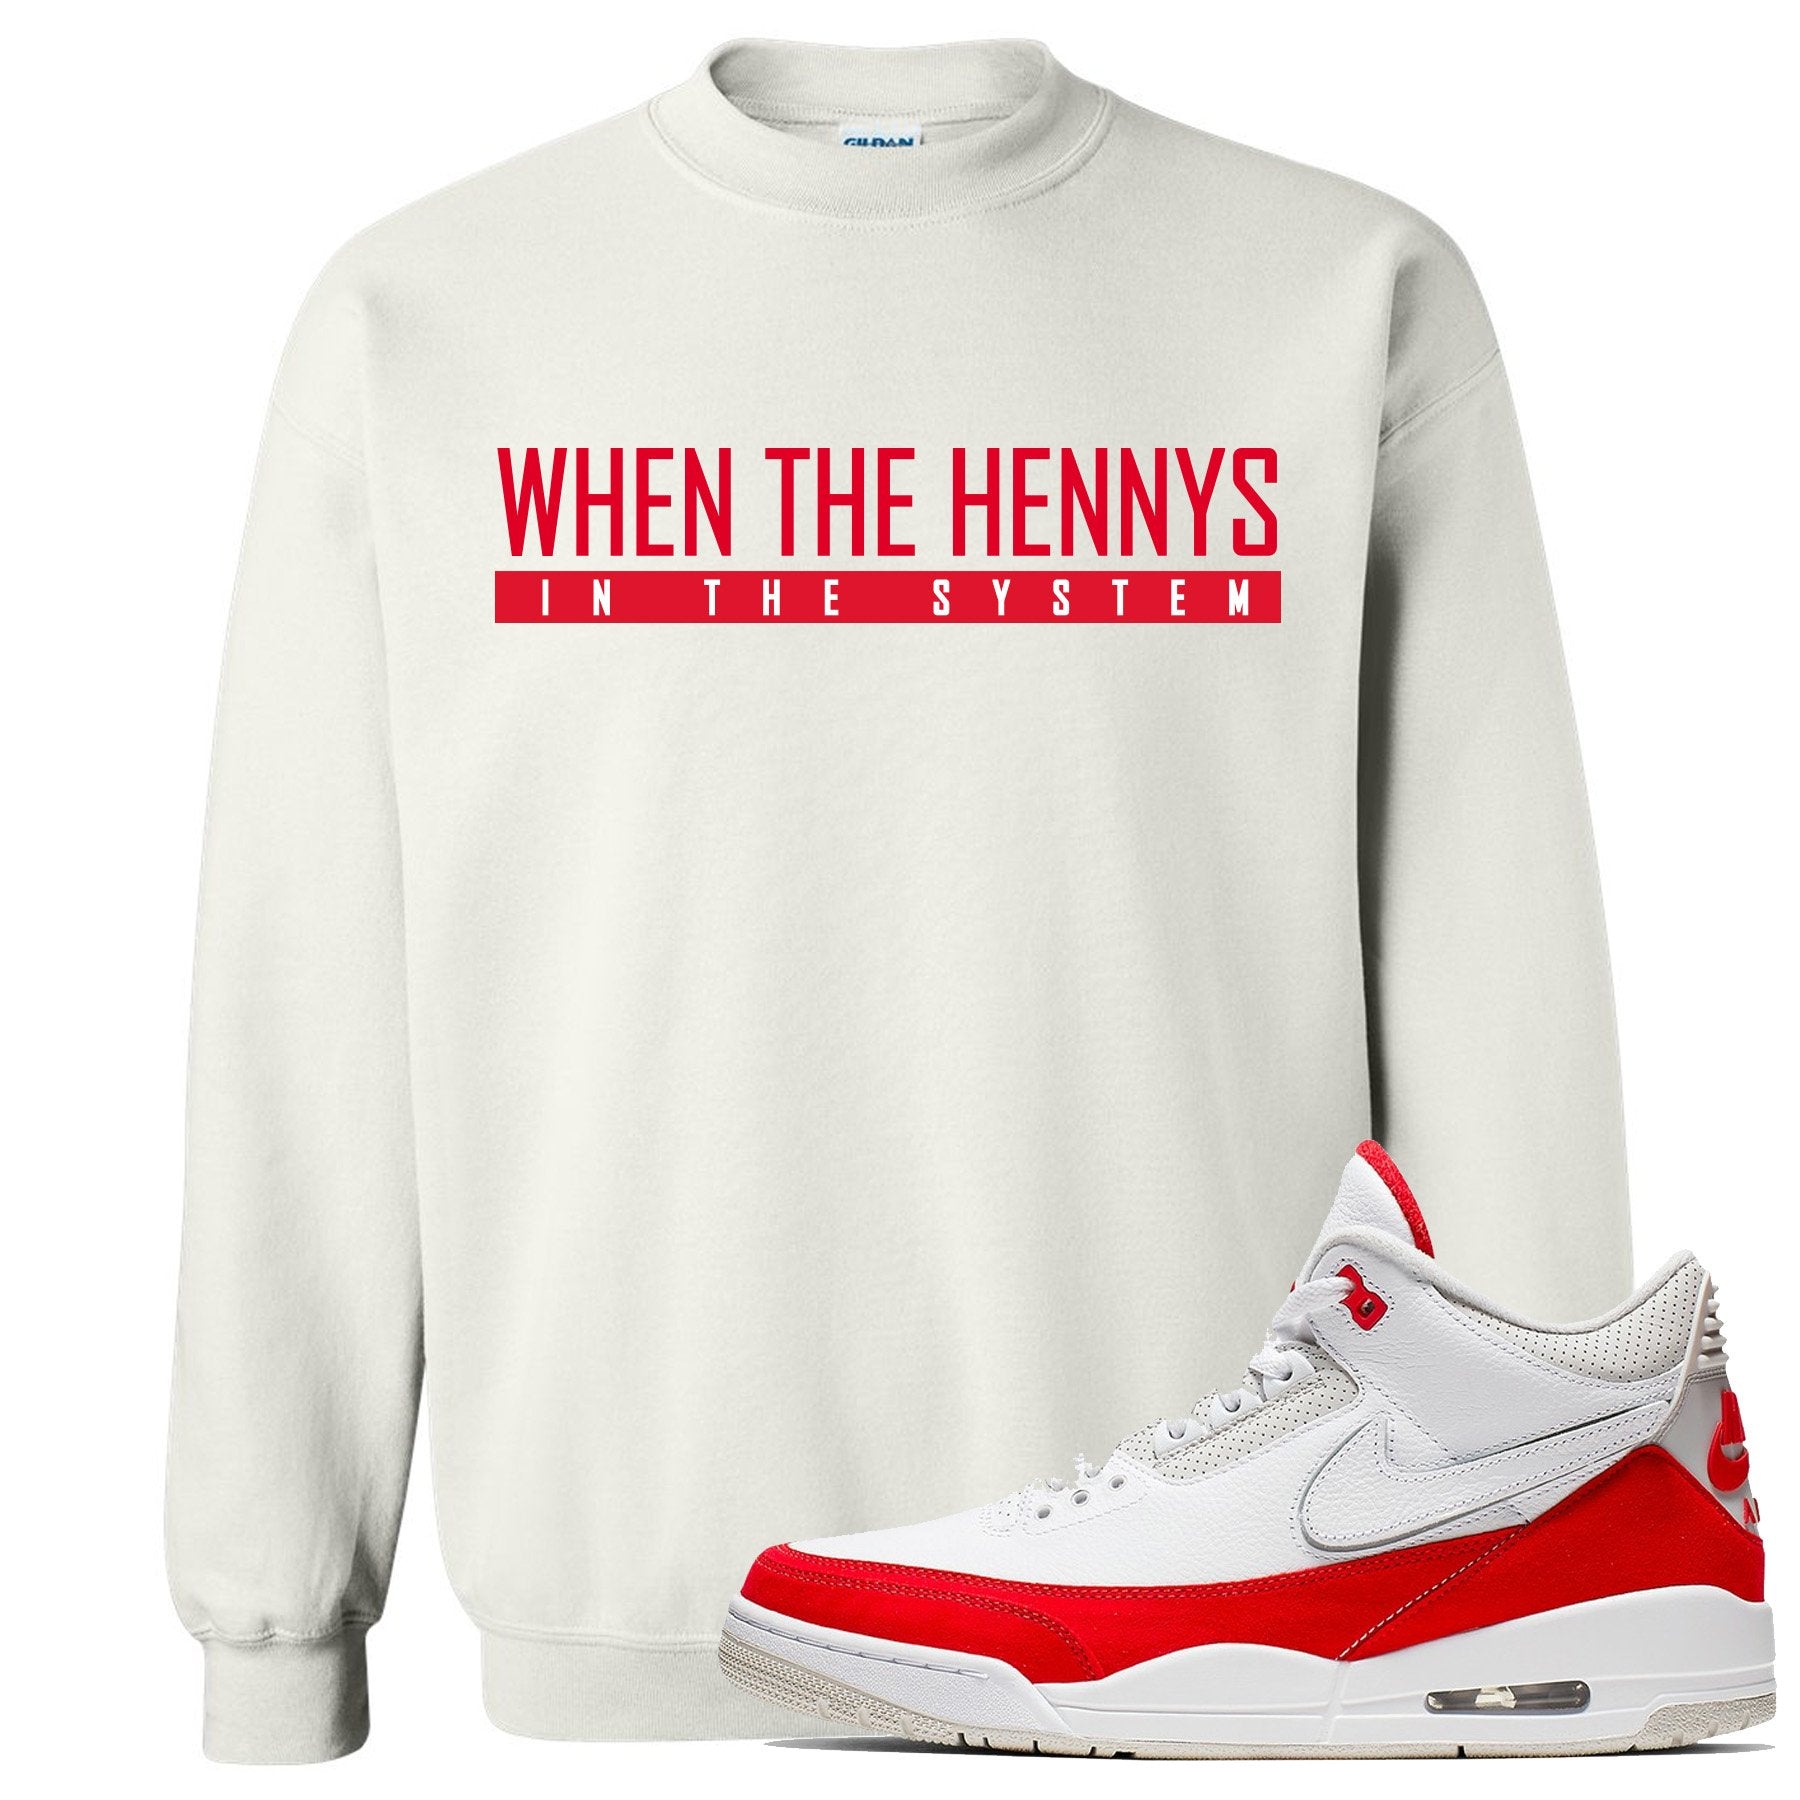 This white and red sweater will match great with your Jordan 3 Tinker Air Max shoes